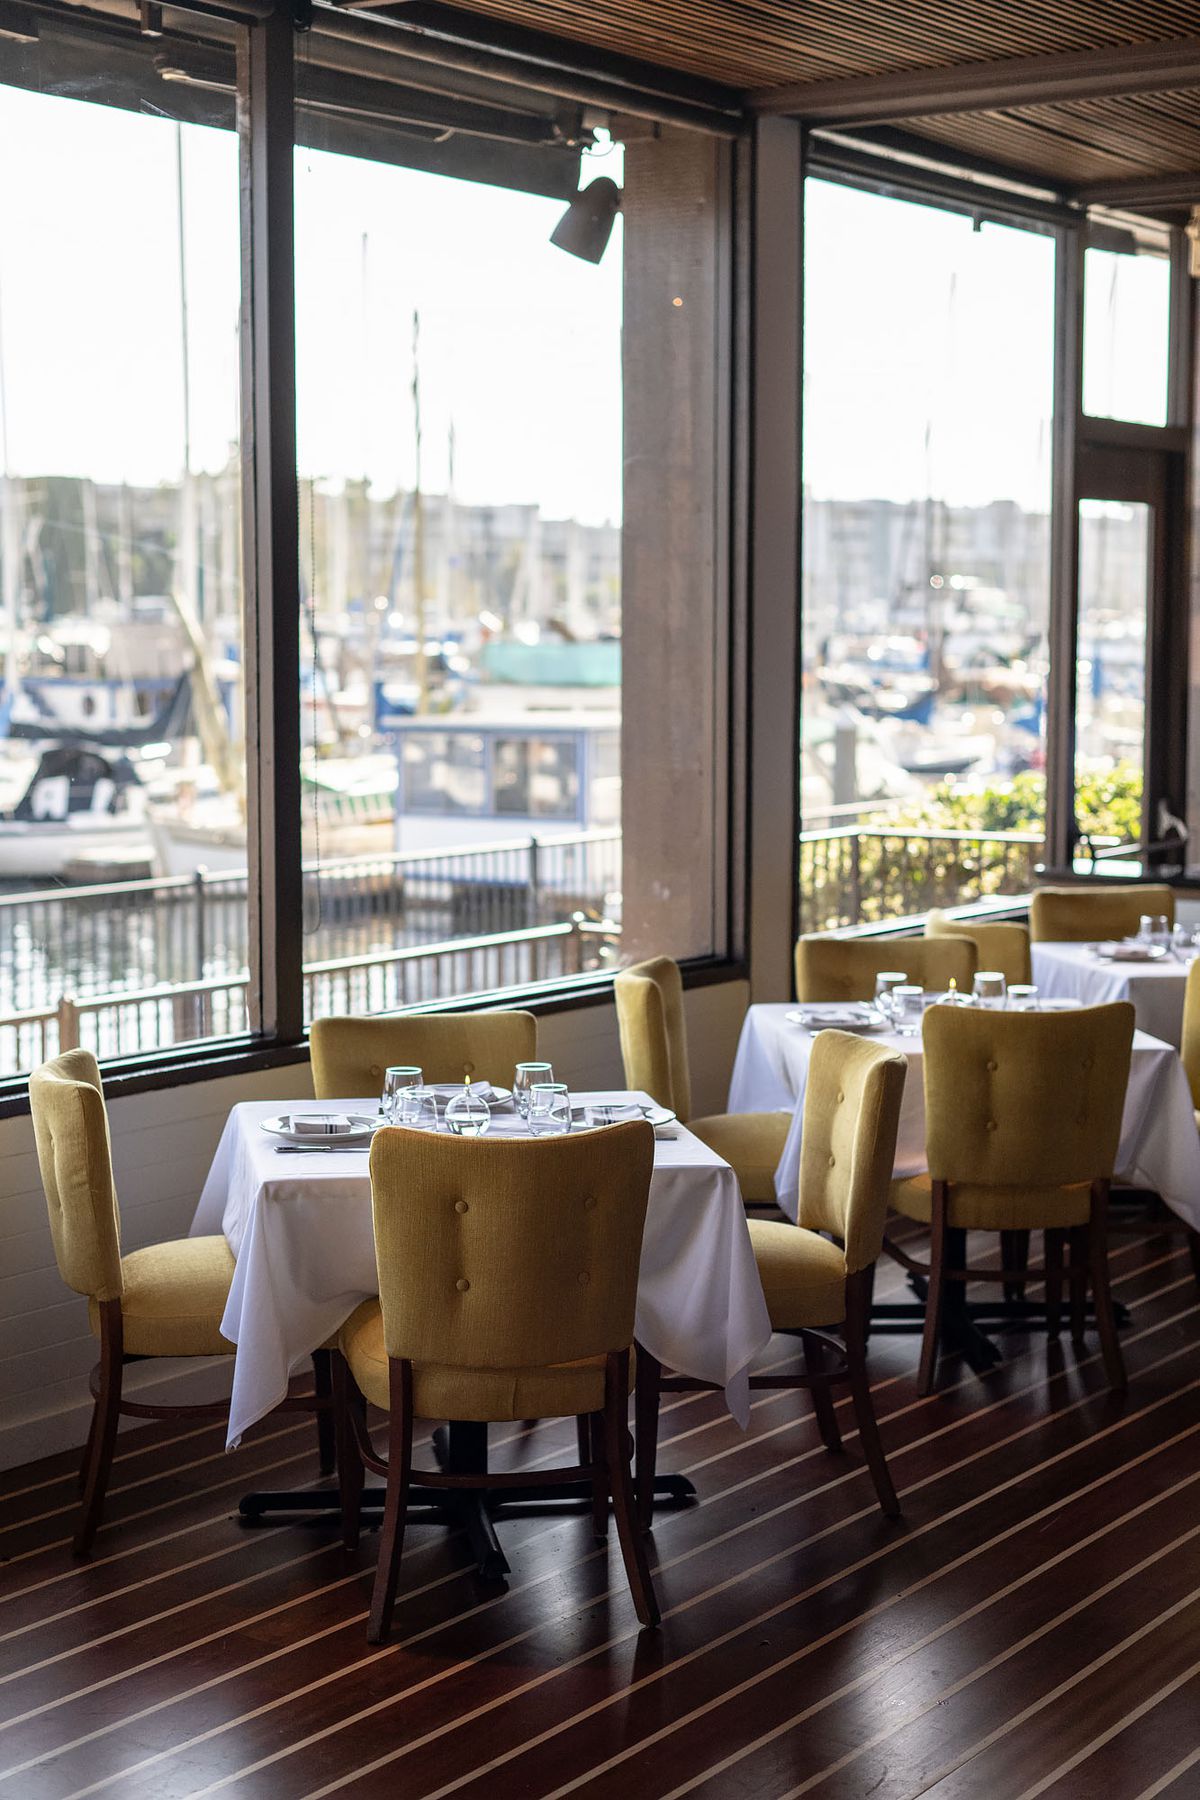 Yellow chairs, white tablecloths, and views of the marina at Dear Jane’s.